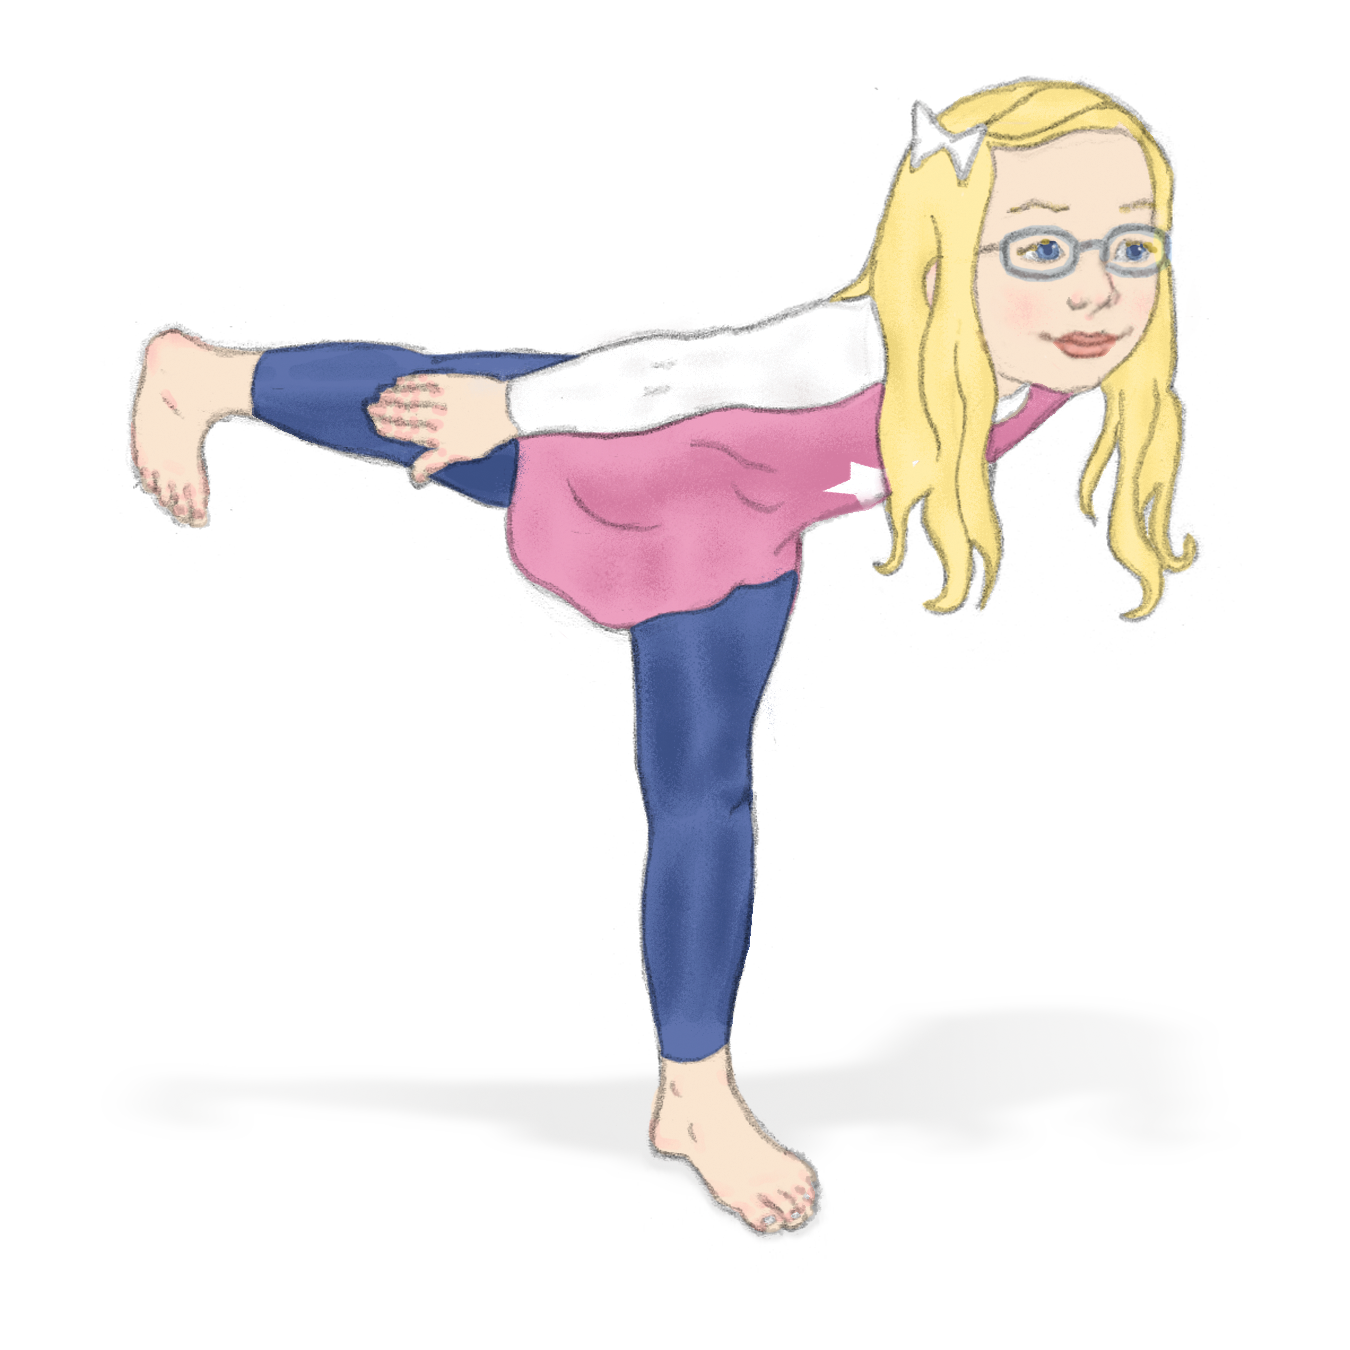 patience clipart yoga poses